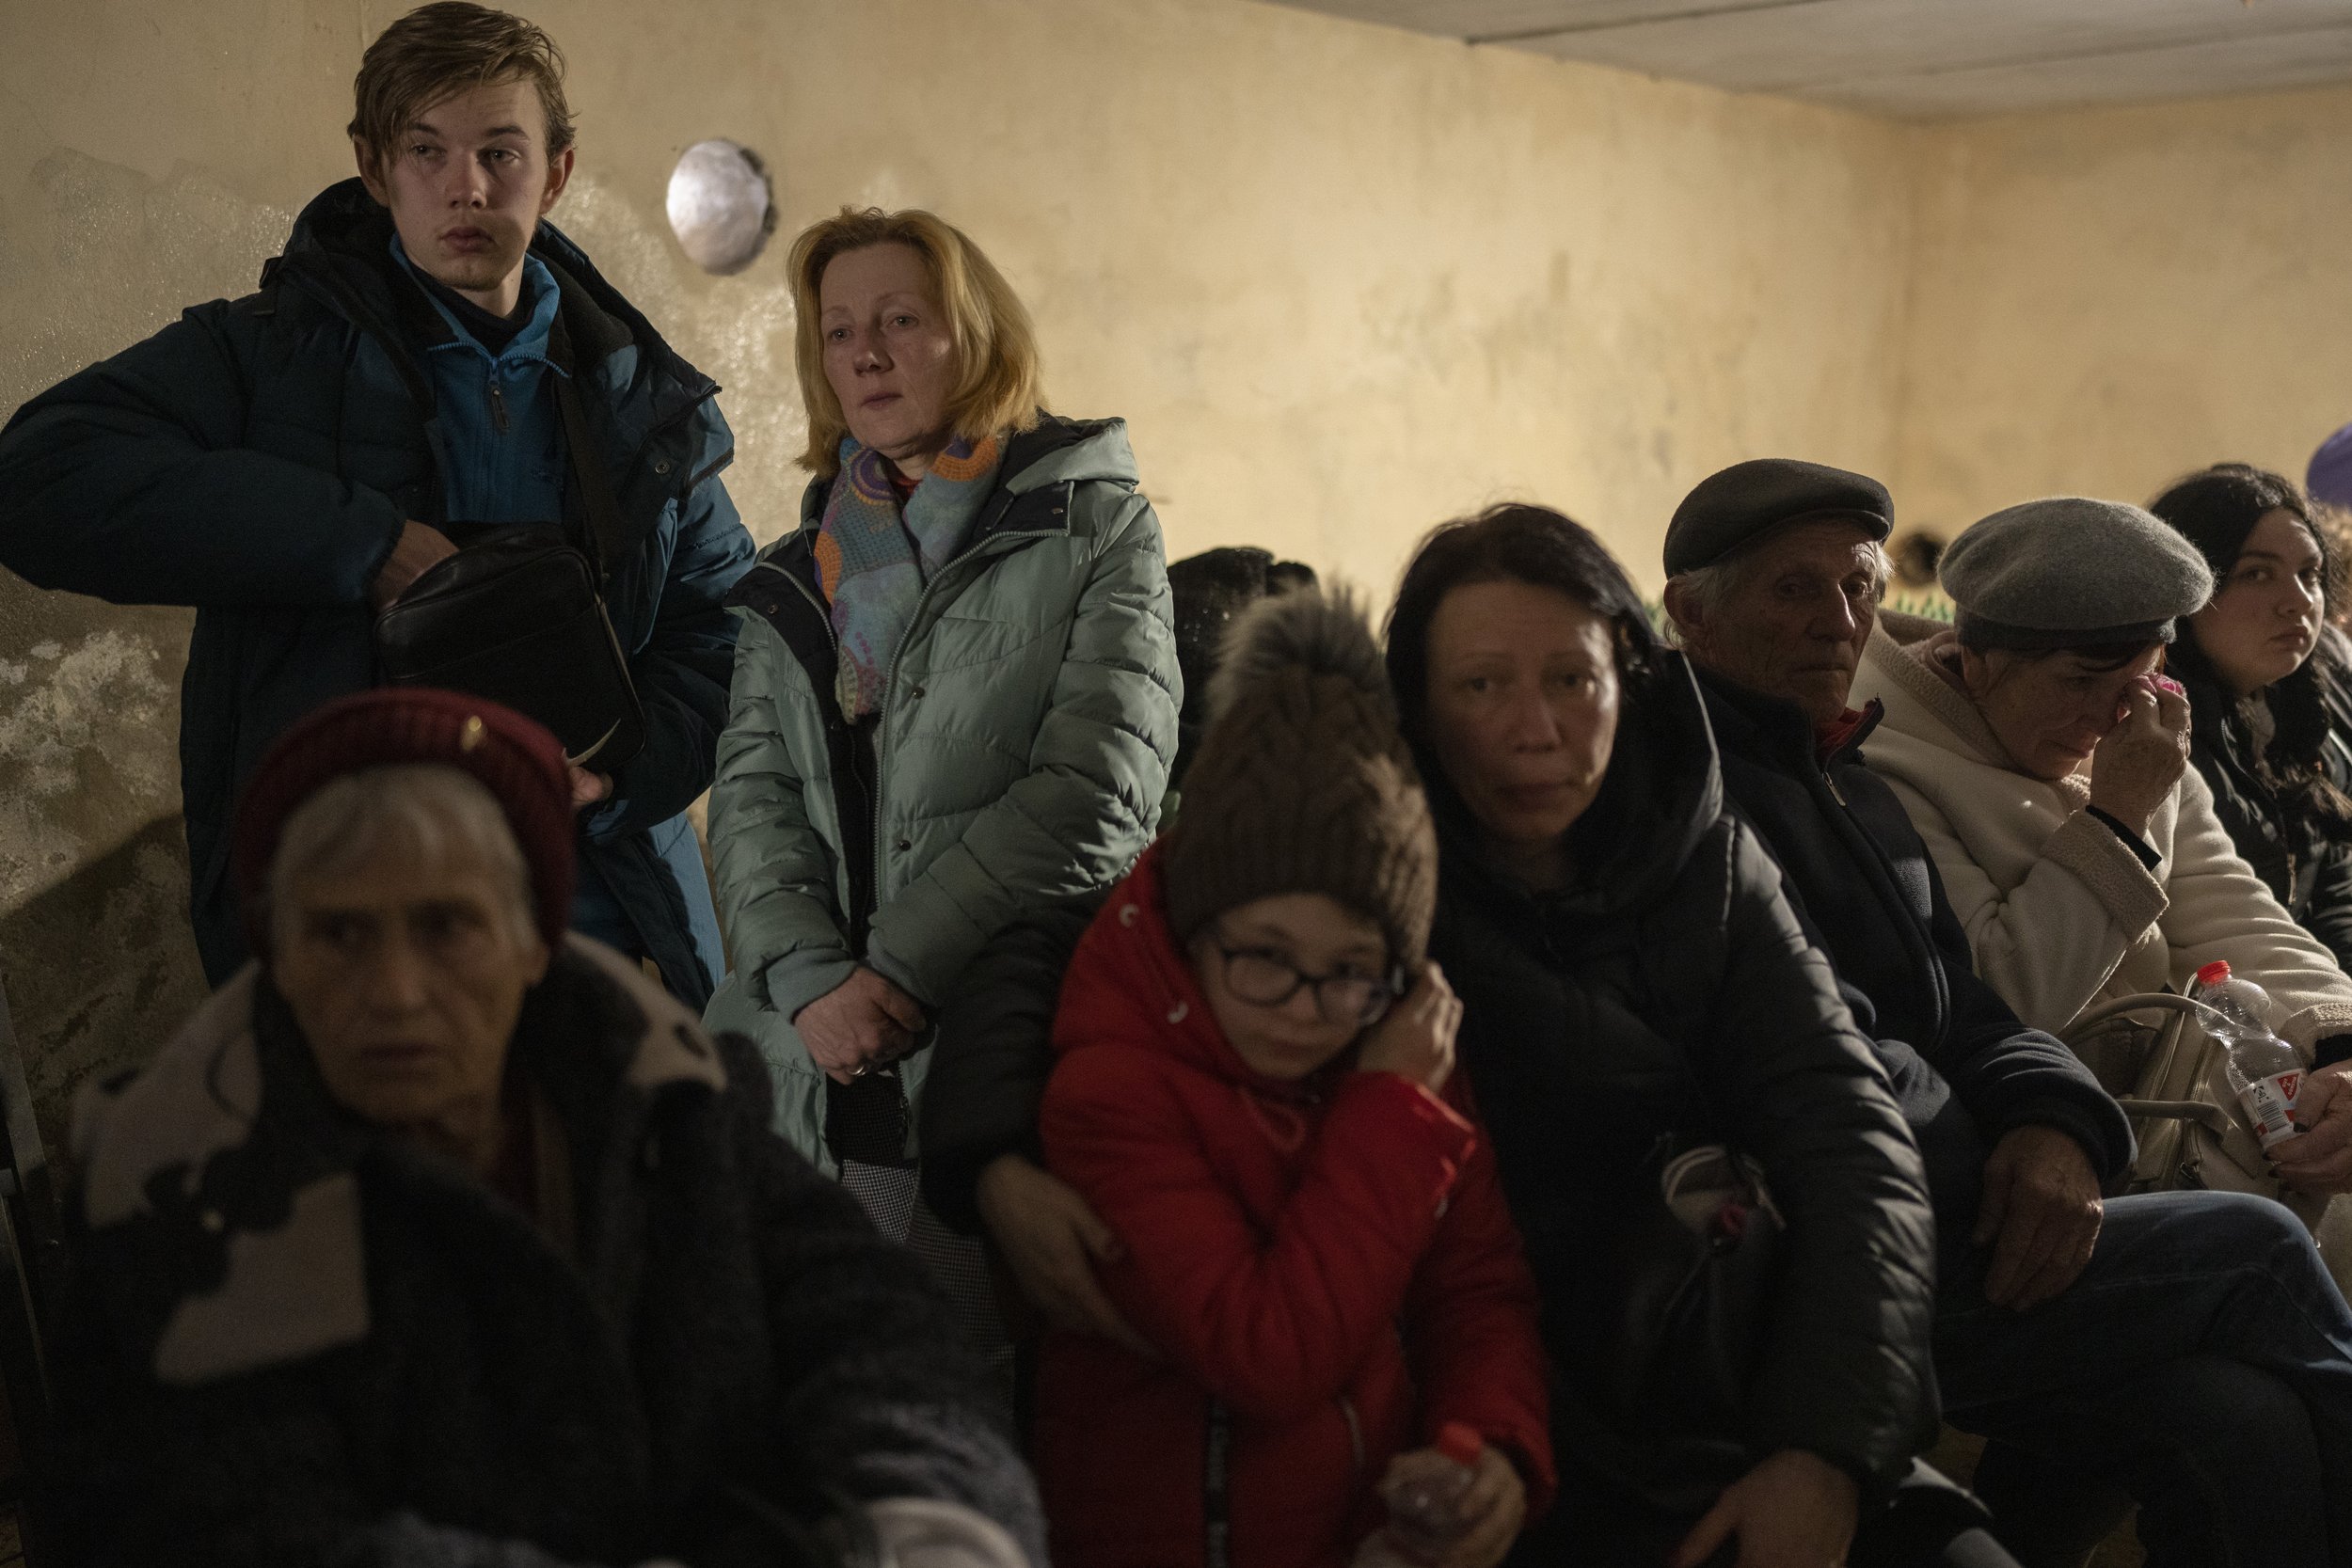  People hide in a basement of a church which is used as a bomb shelter, after fleeing from nearby villages that have been attacked by the Russian army, in the town of Bashtanka, Mykolaiv district, Ukraine,on Thursday, March 31, 2022. (AP Photo/Petros